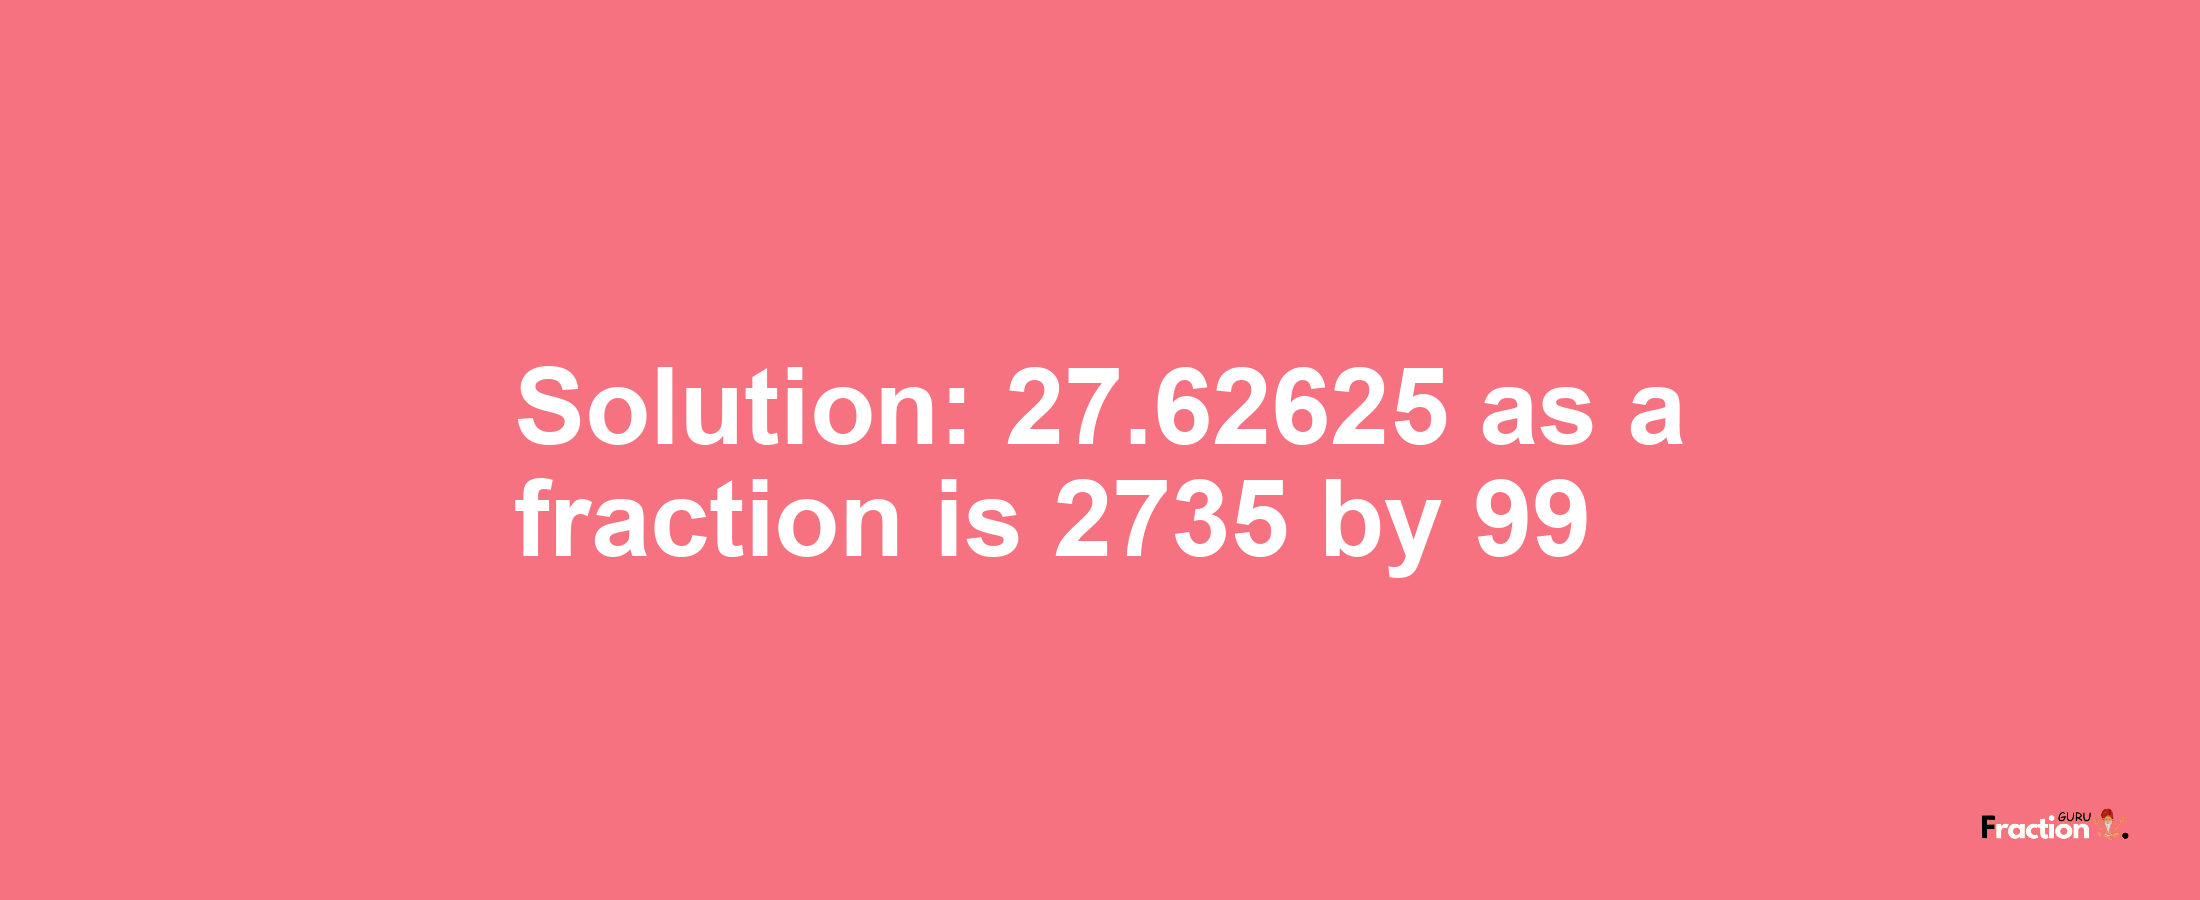 Solution:27.62625 as a fraction is 2735/99